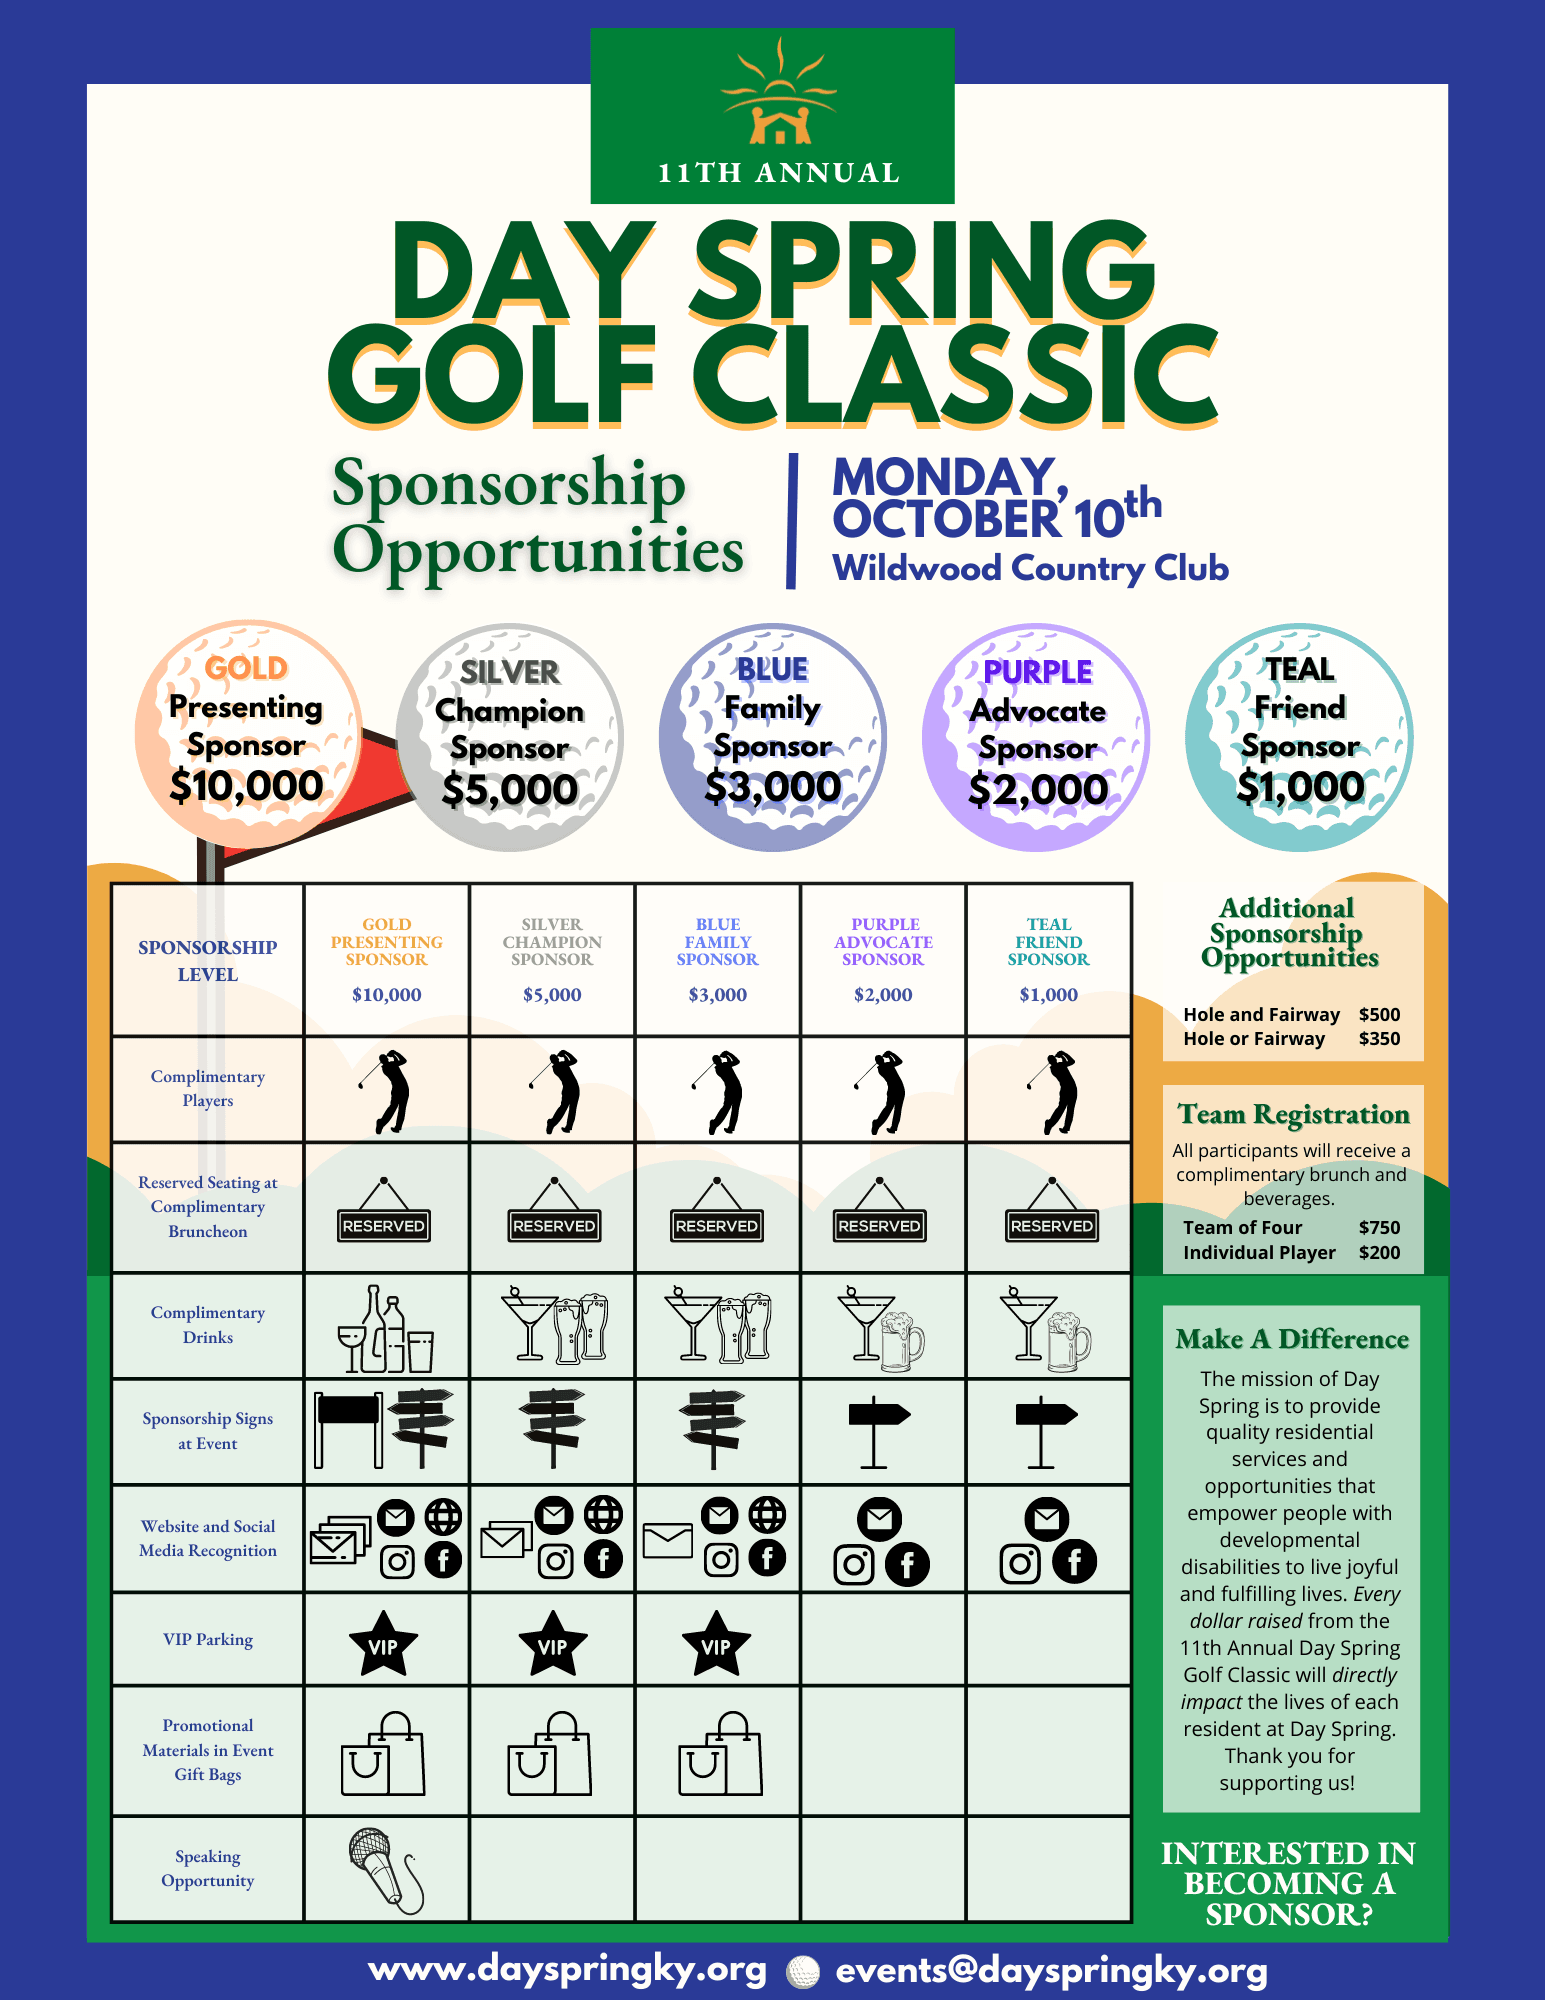 Day Spring Golf Classic Sponsorship Opportunities